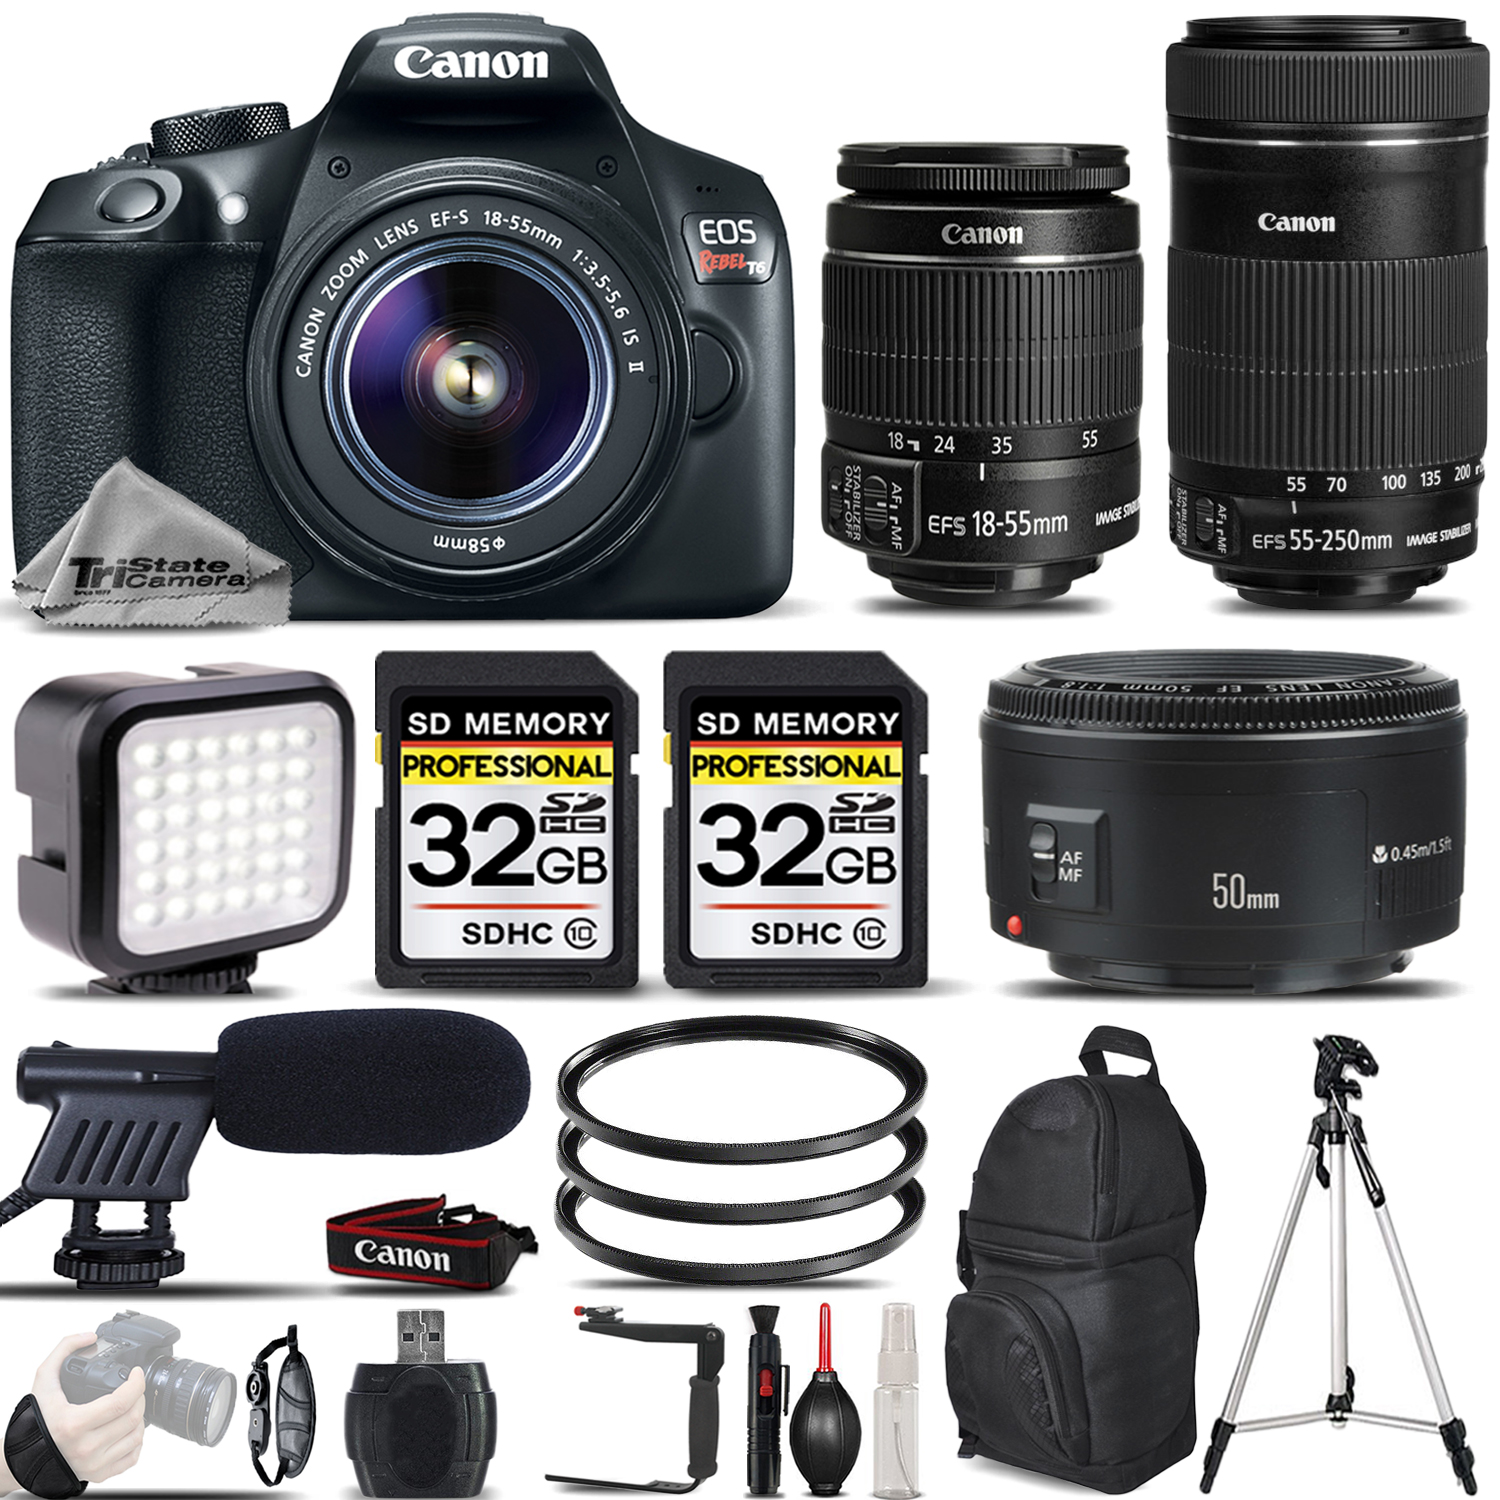 EOS Rebel T6 DSLR Camera + 18-55mm Lens + 55-250 IS STM +Canon 50mm 1.8 II *FREE SHIPPING*